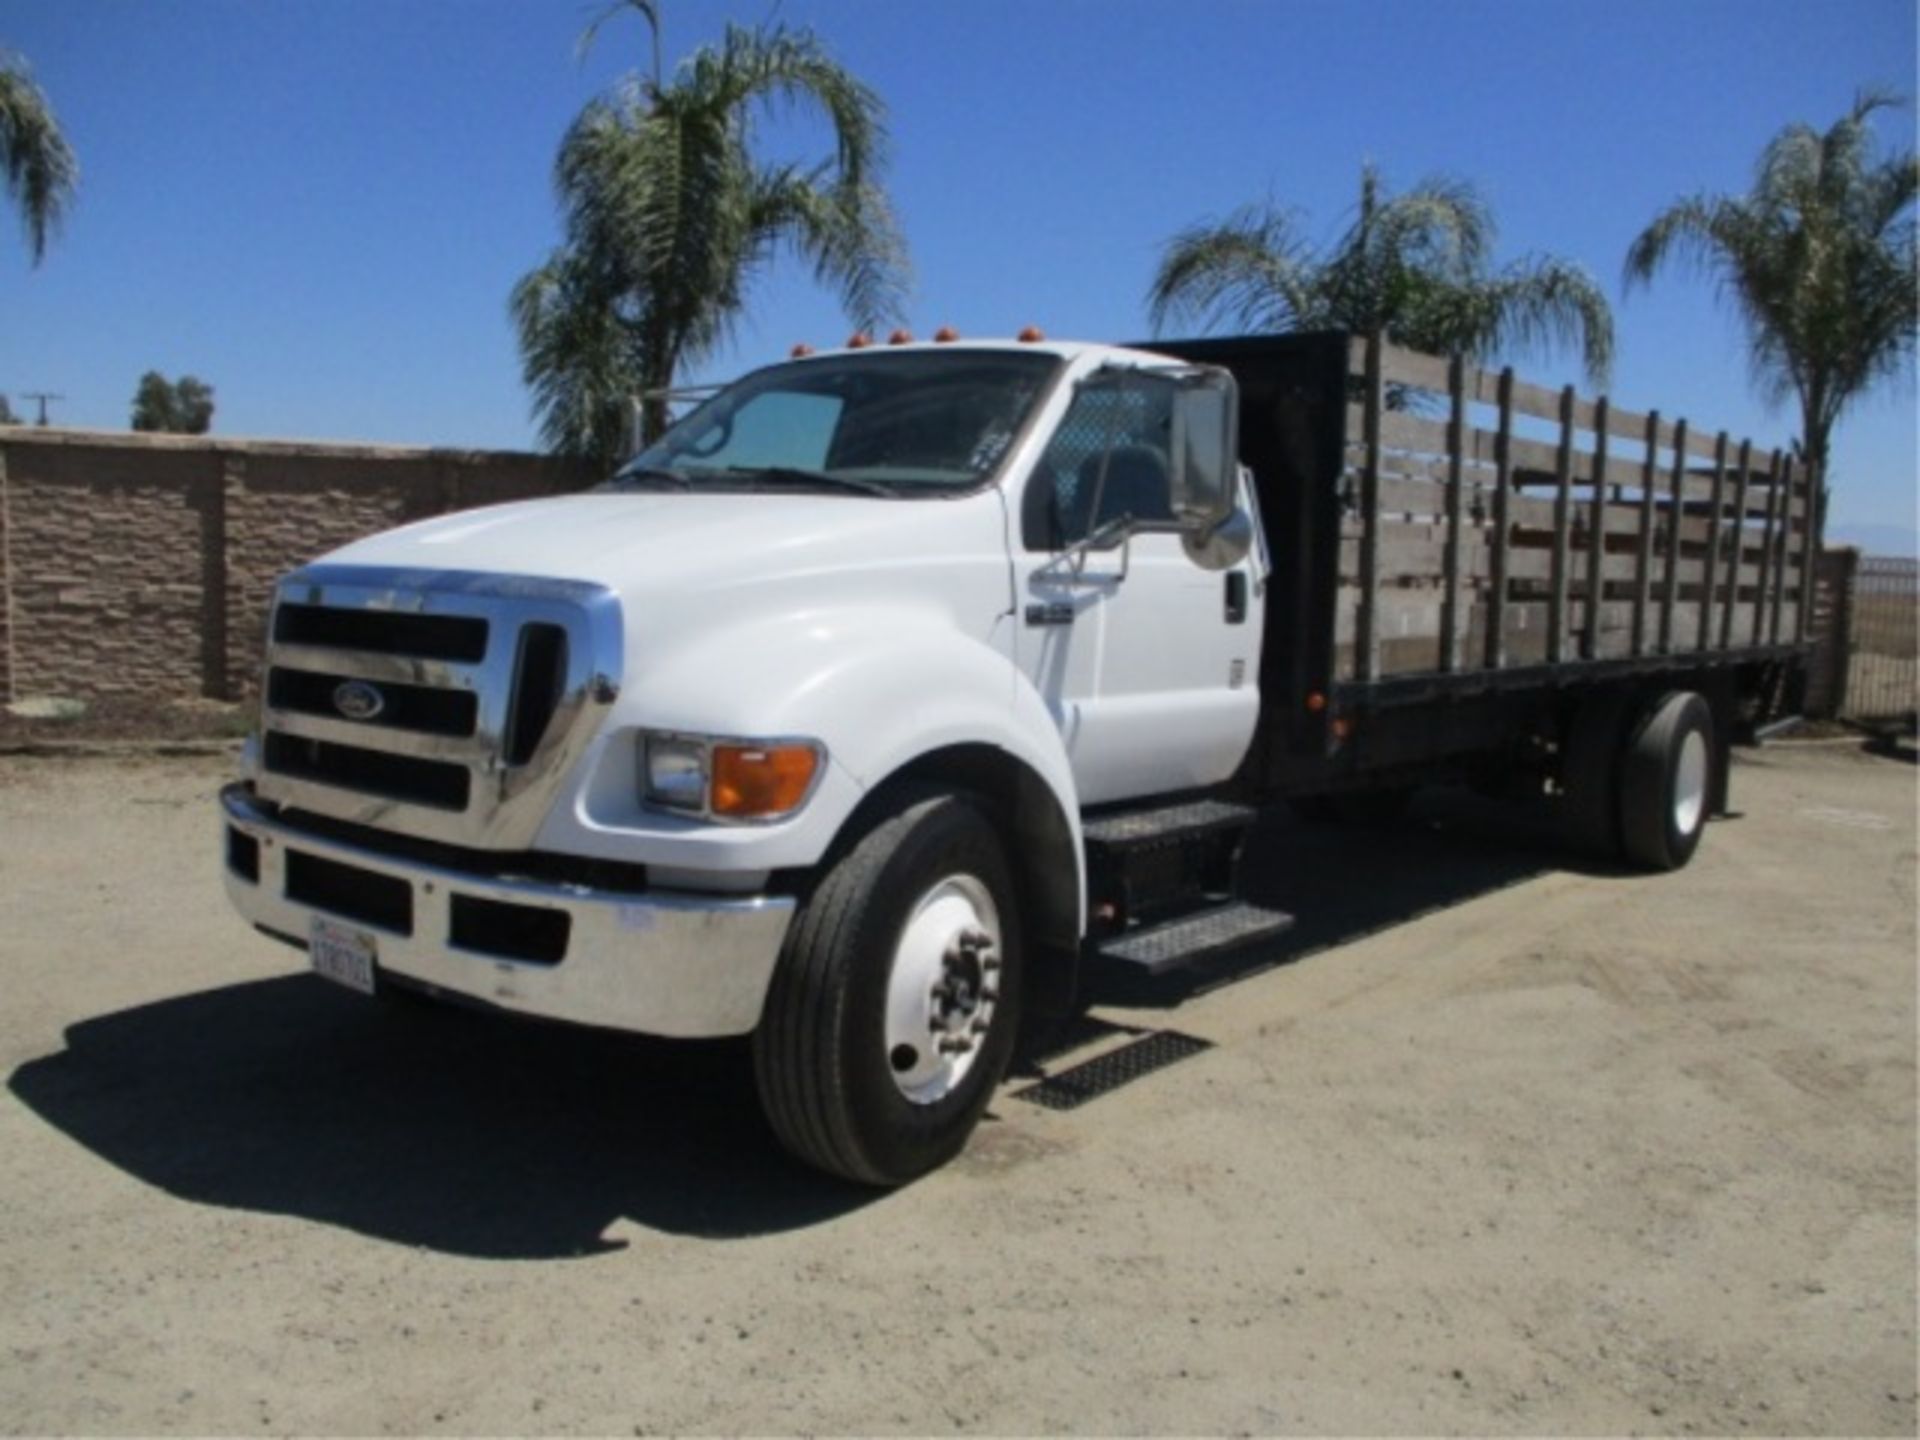 2005 Ford F650 S/A Flatbed Stakebed Truck, Cat C7 Acert 7.2L 6-Cyl Diesel, Automatic, Lift Gate, 24' - Image 3 of 61